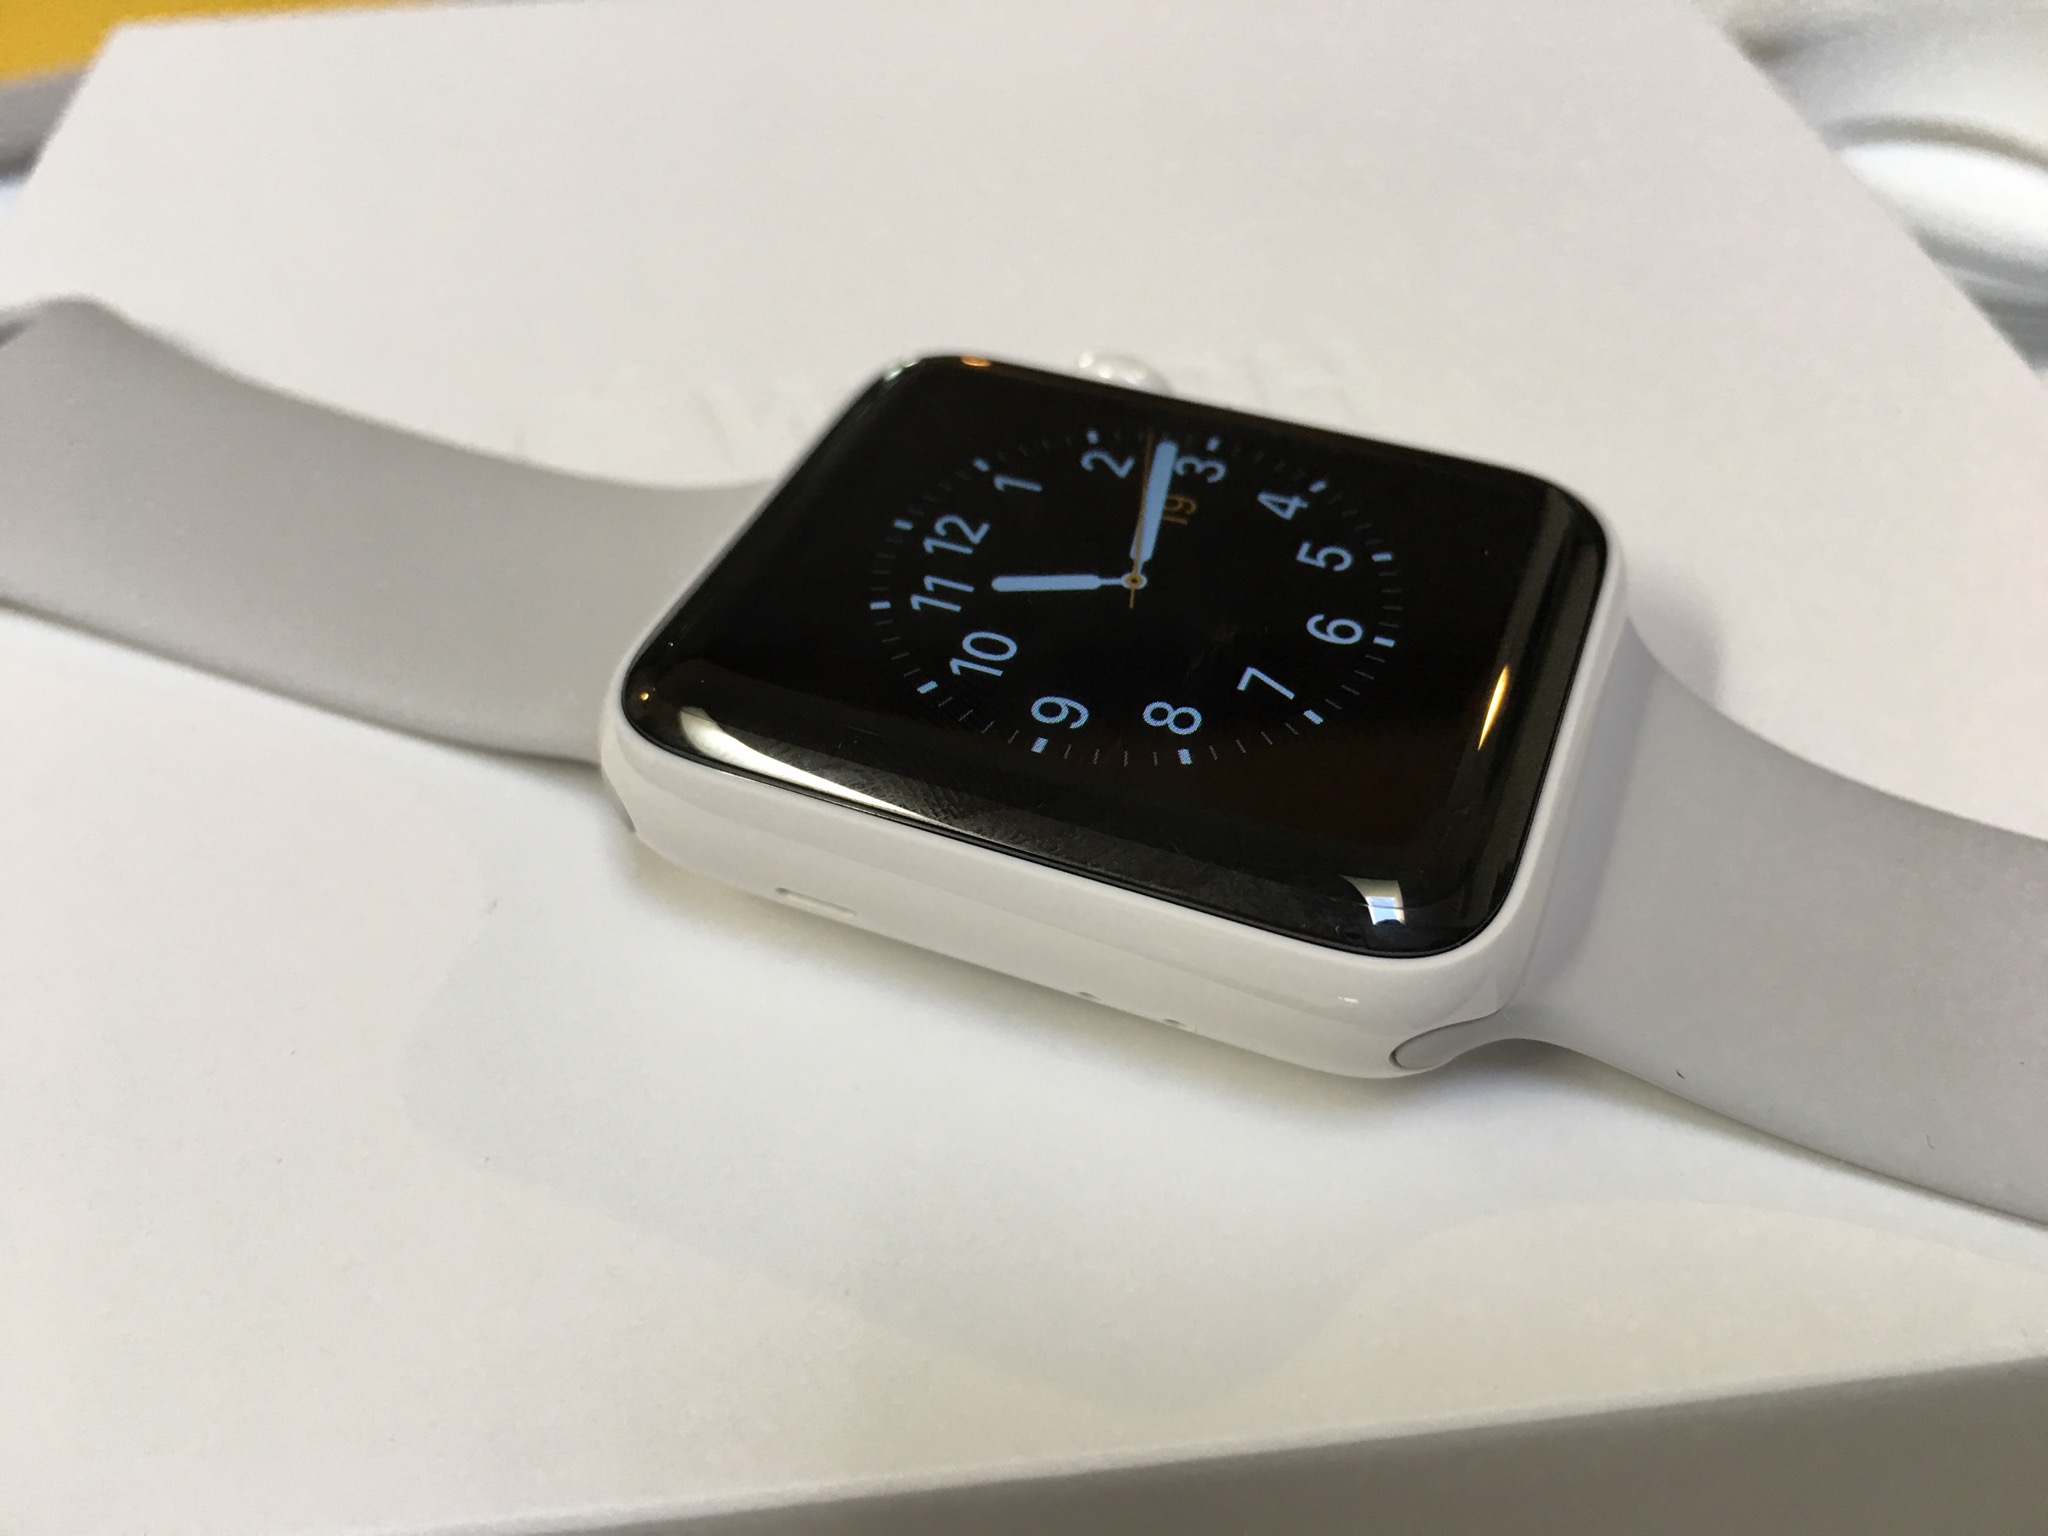 The new $1300 ceramic Apple Watch Edition Series 2 ships with an 